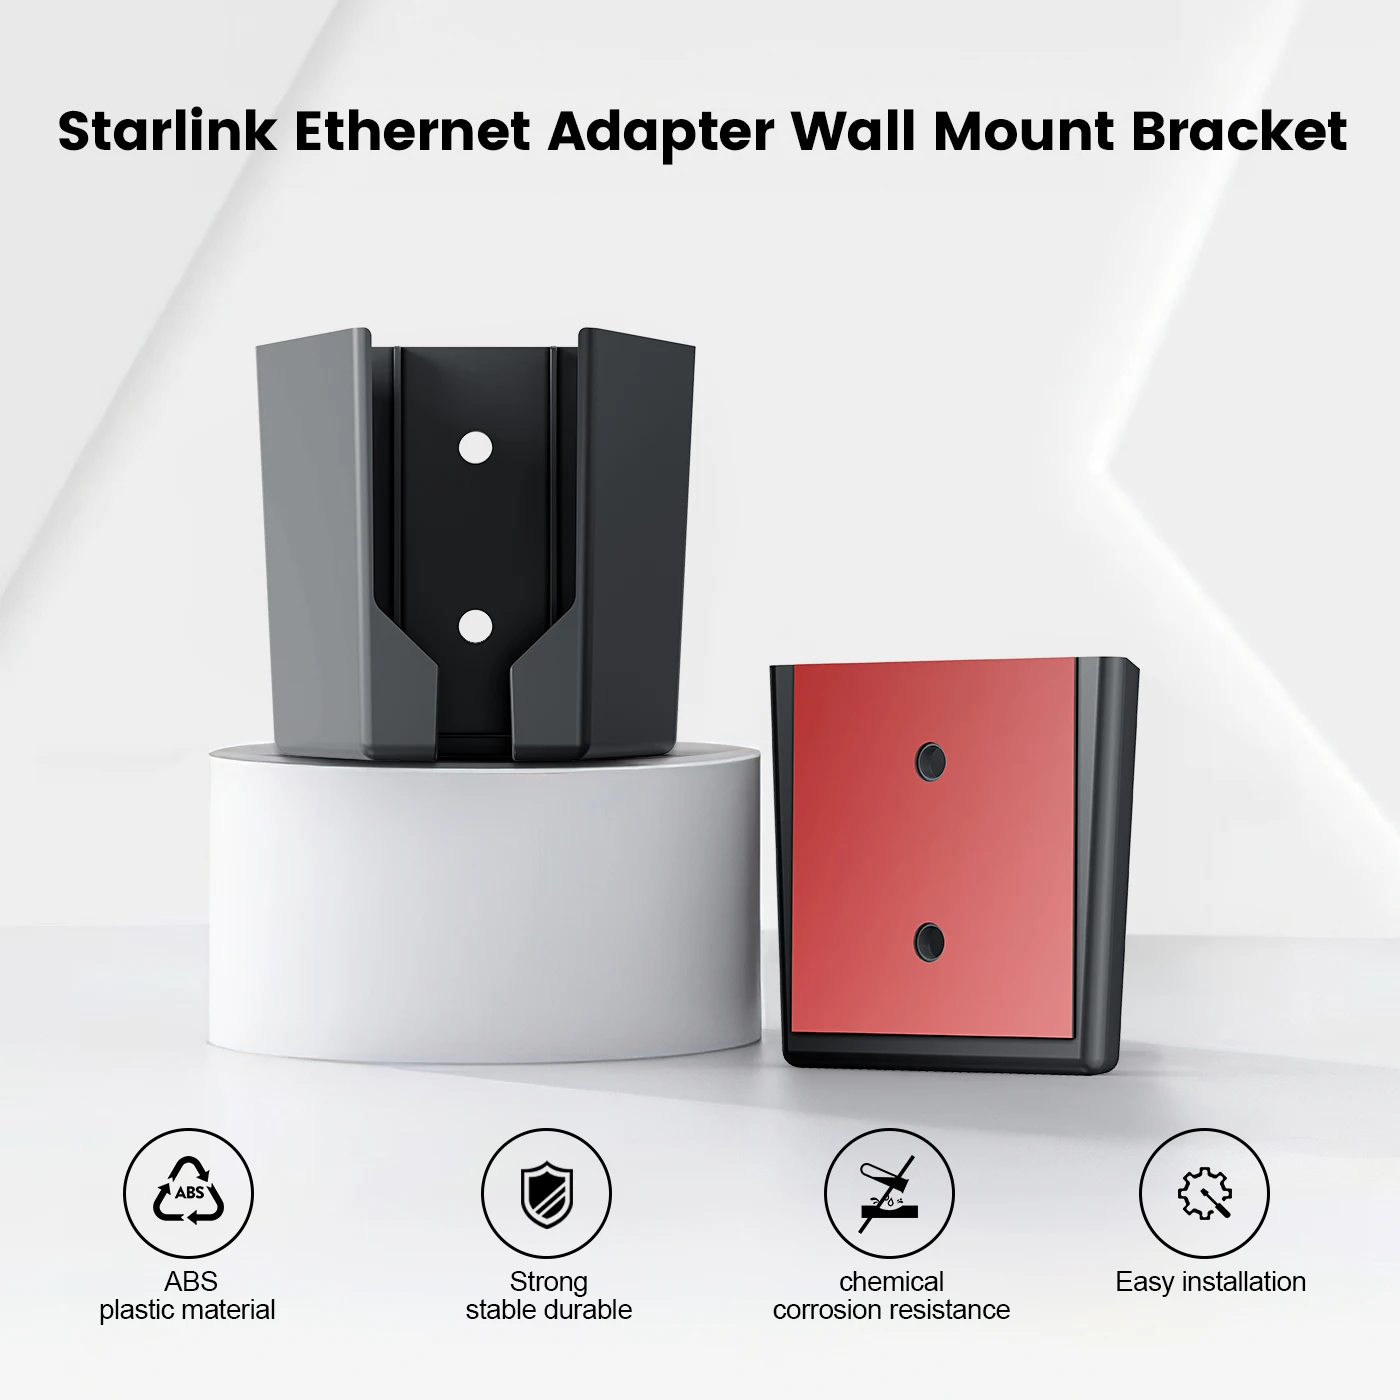 Adaptateur Ethernet EDettes StarLink, support mural, supports ABS